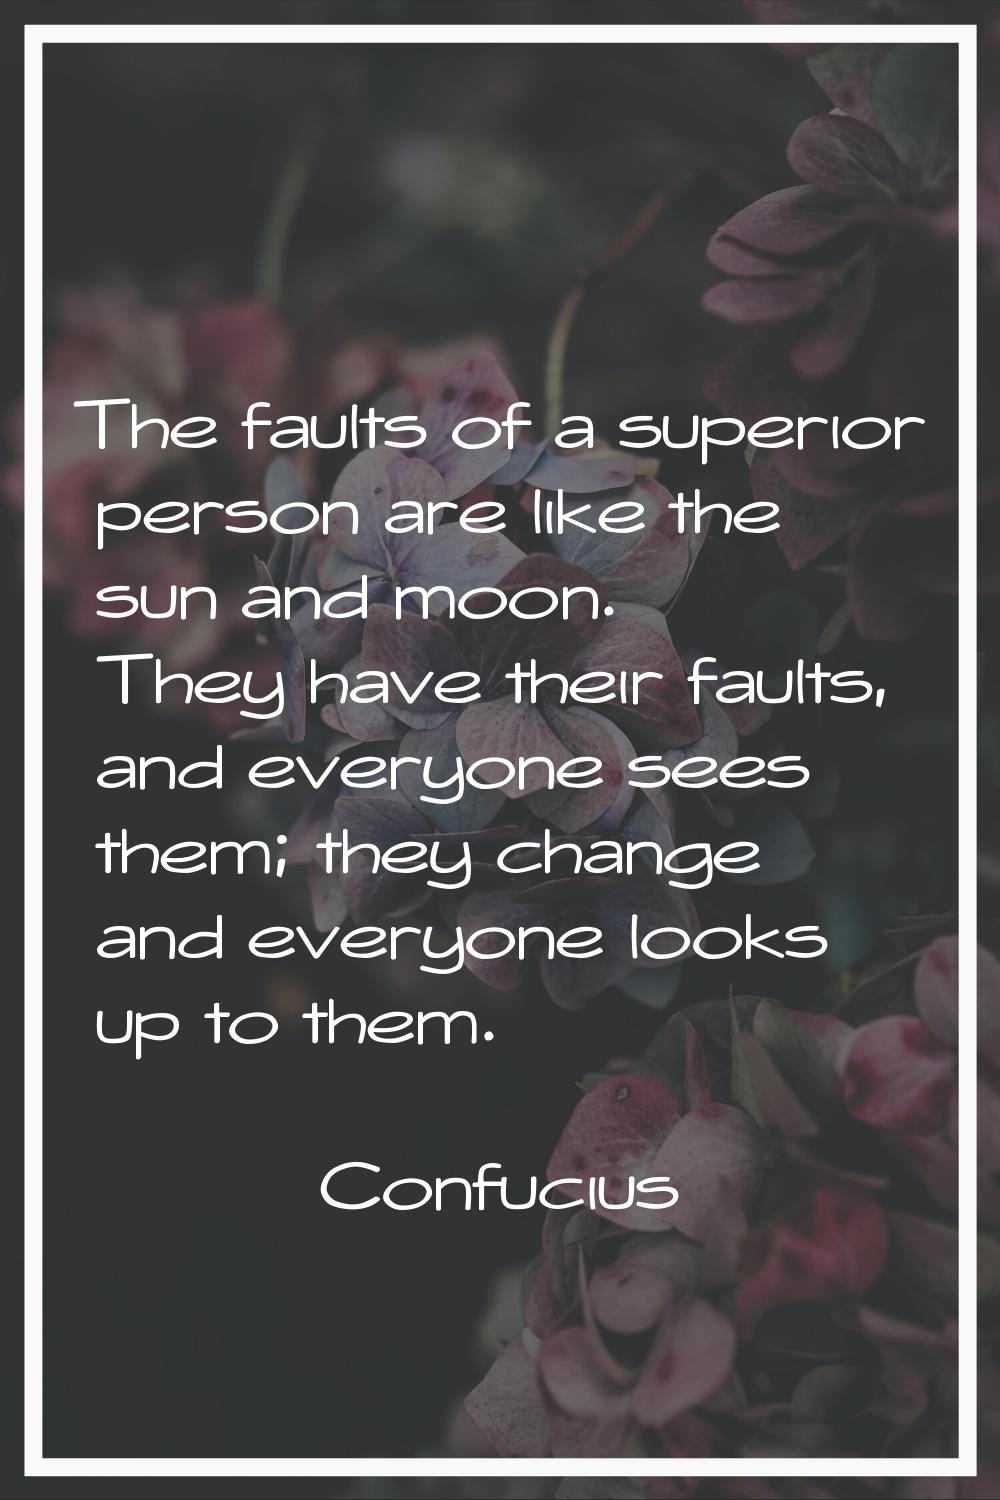 The faults of a superior person are like the sun and moon. They have their faults, and everyone see